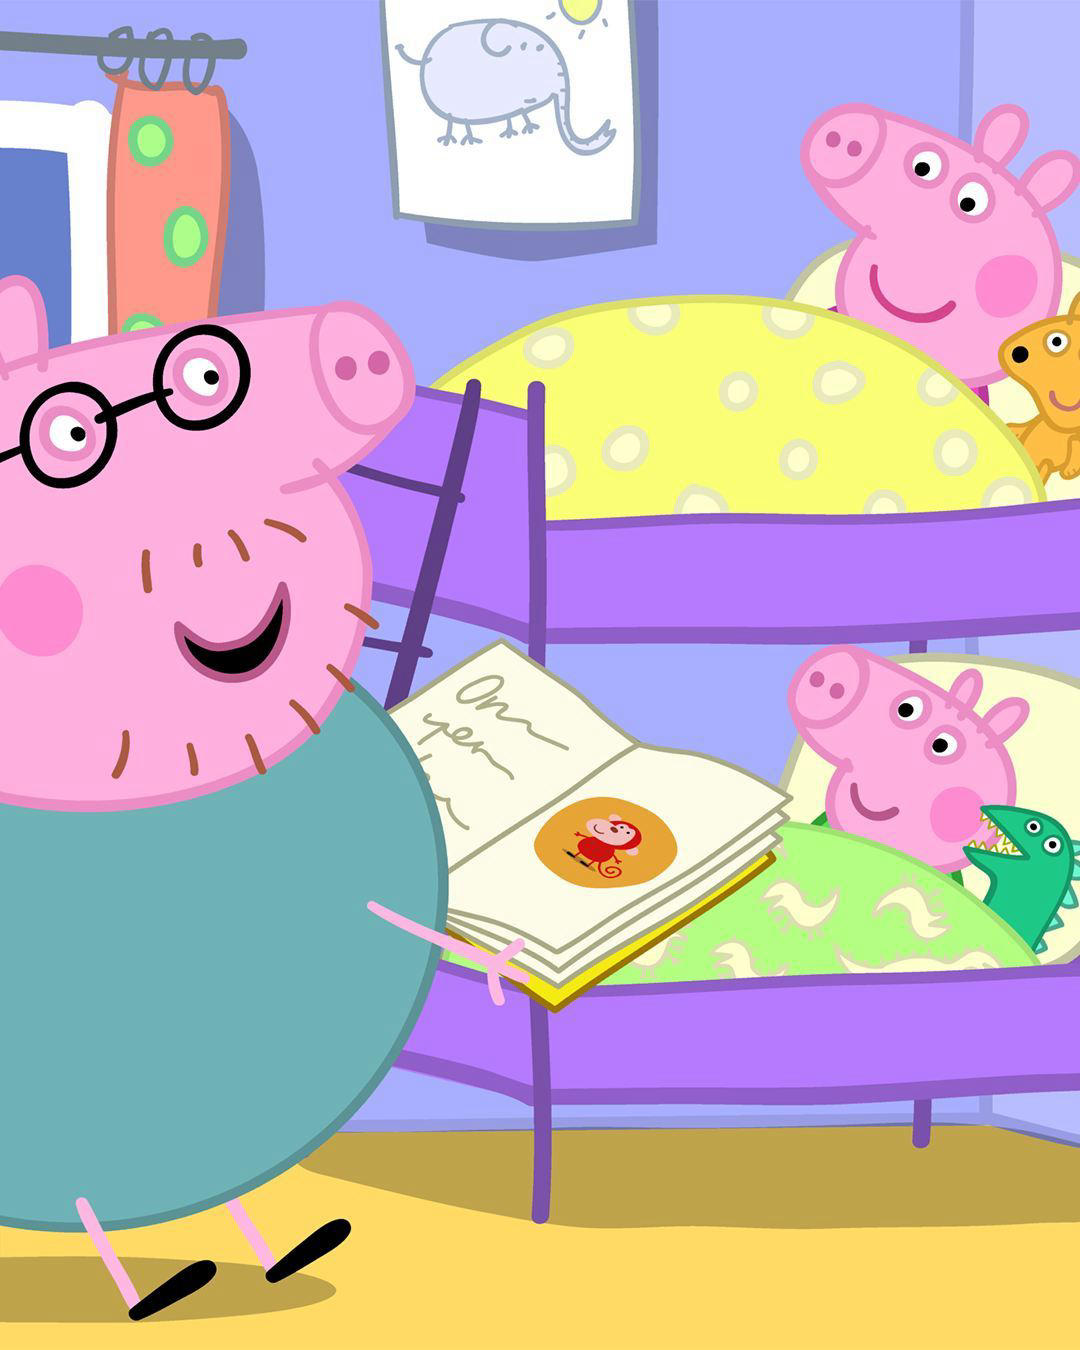 image  1 Peppa Pig - At the end of a busy day there's nothing better than cosying up with your little piggies